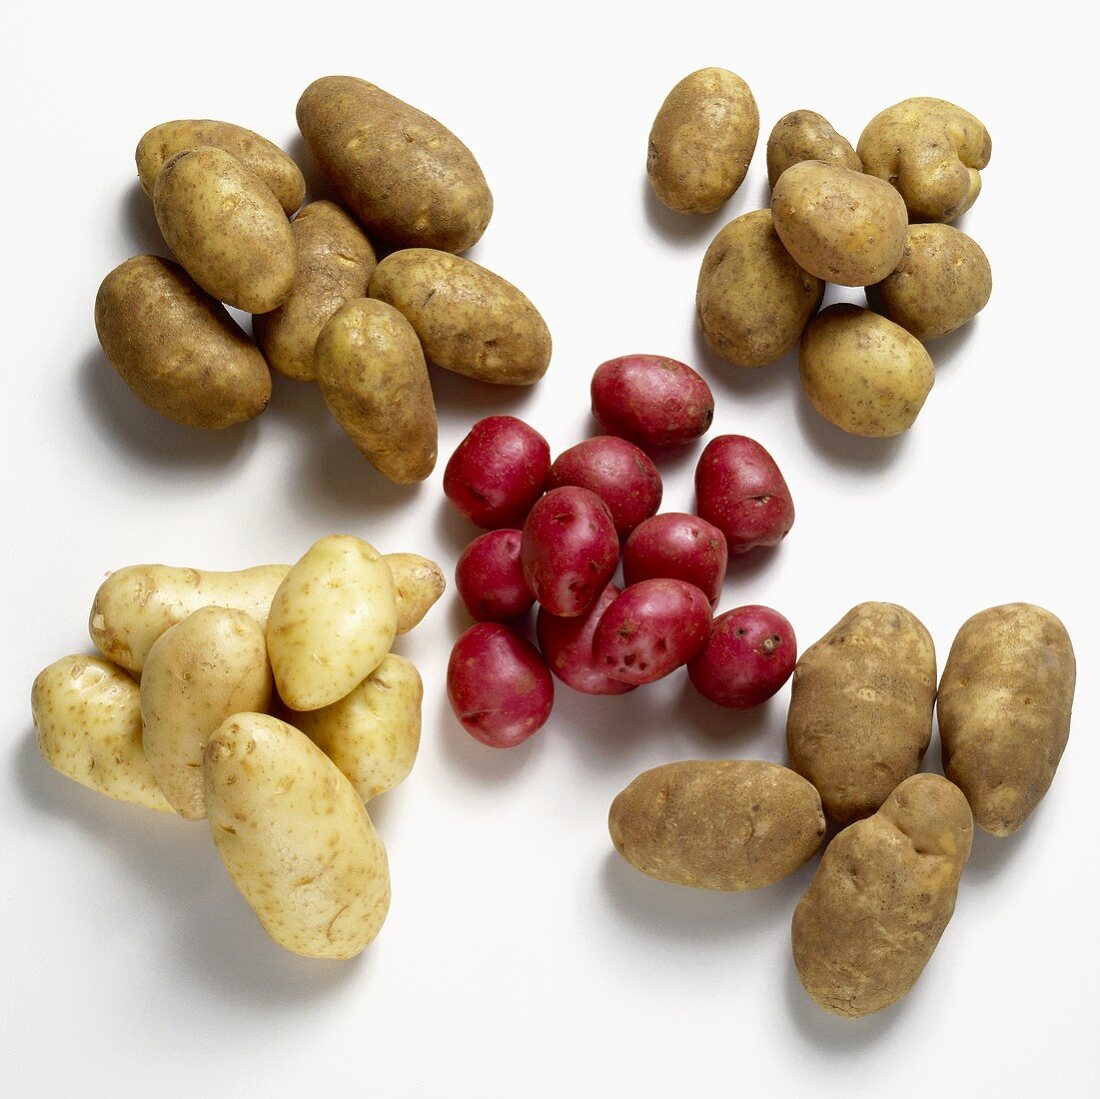 Variety of Potatoes on White Background